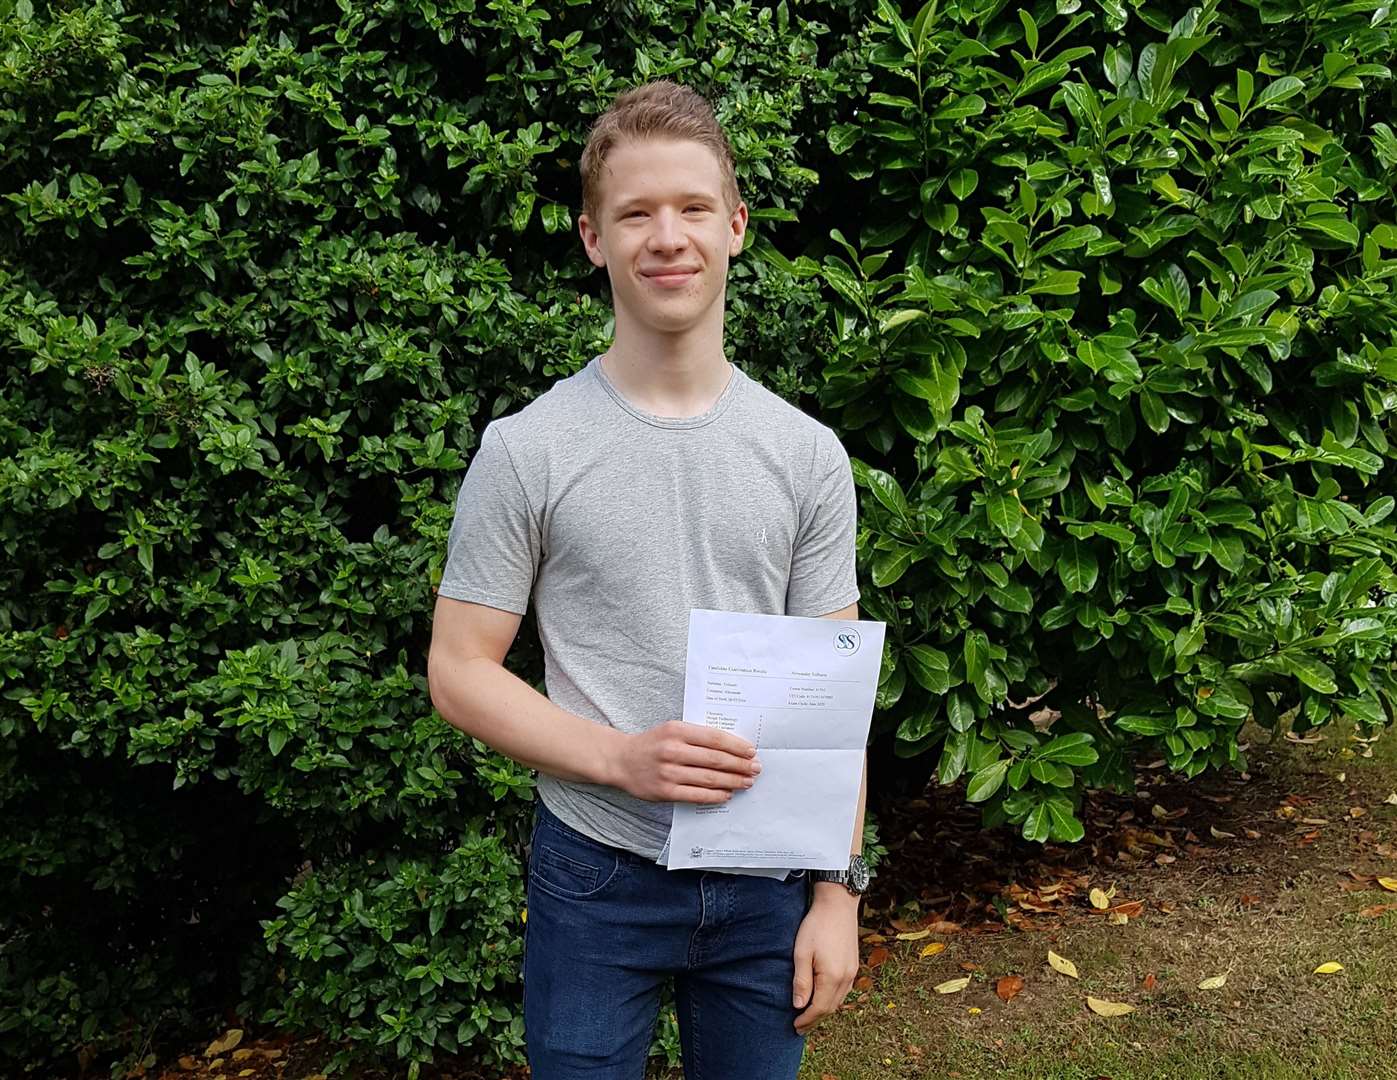 Alex Tolhurst from Sutton Valence School received nine 9s and two 7s